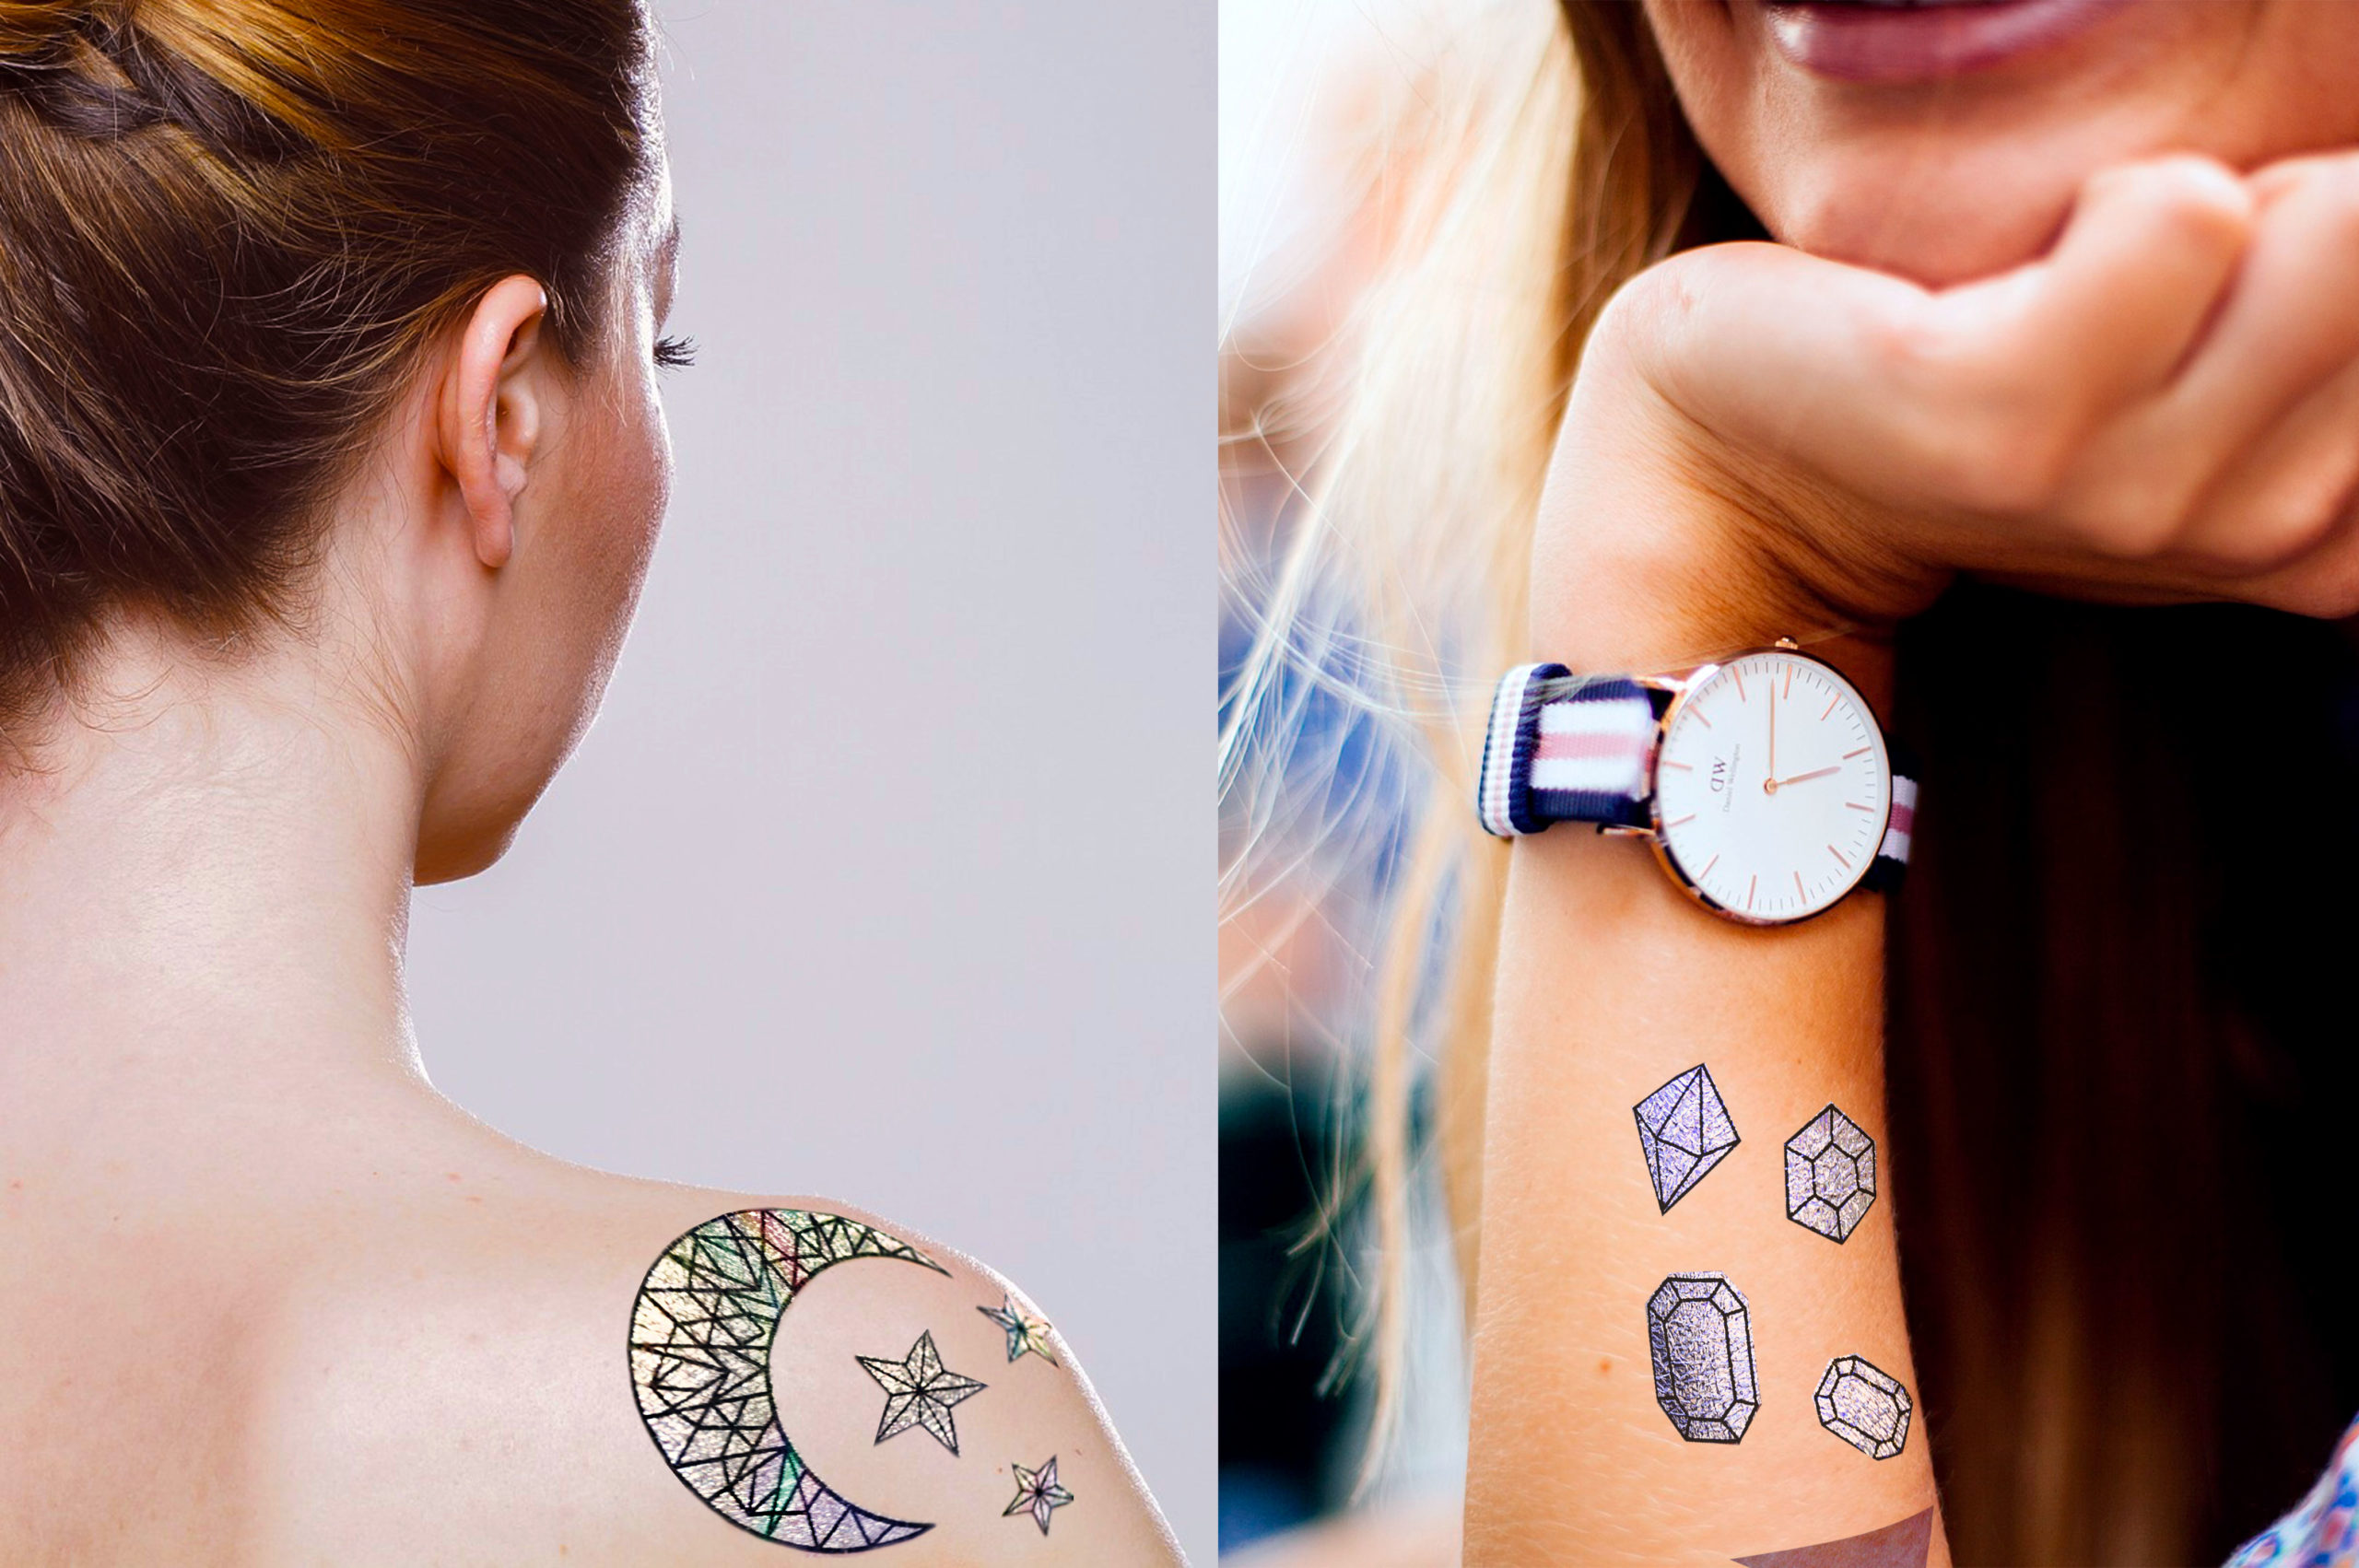 Buy Holographic Tattoo Inspired Sicker Pack Online in India - Etsy